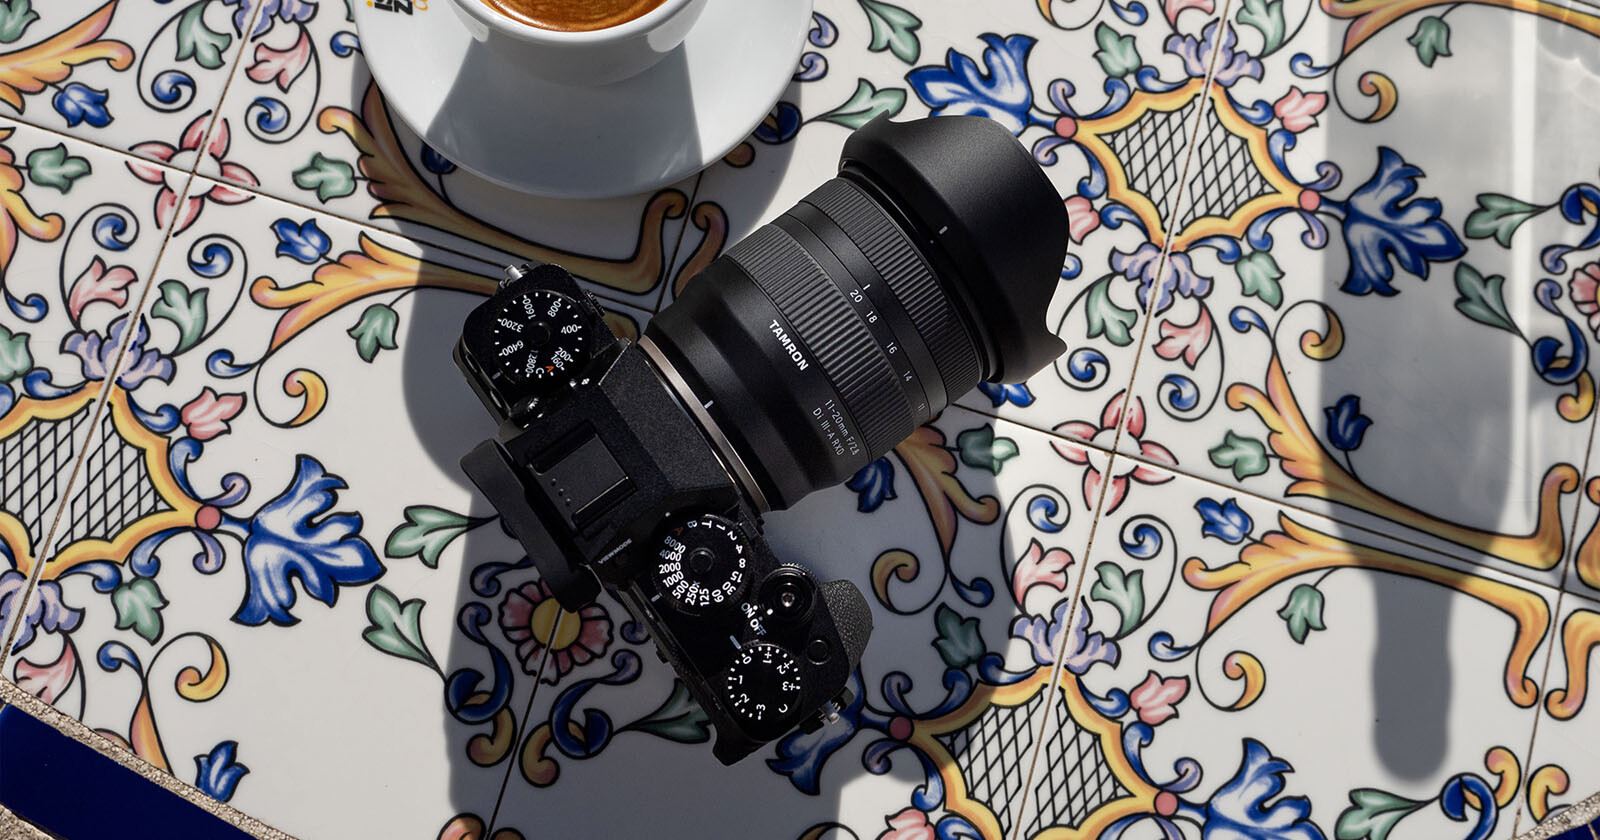 Tamrons 11-20mm f/2.8 is a New Fast, Wide-Angle Zoom for Fujifilm Cameras